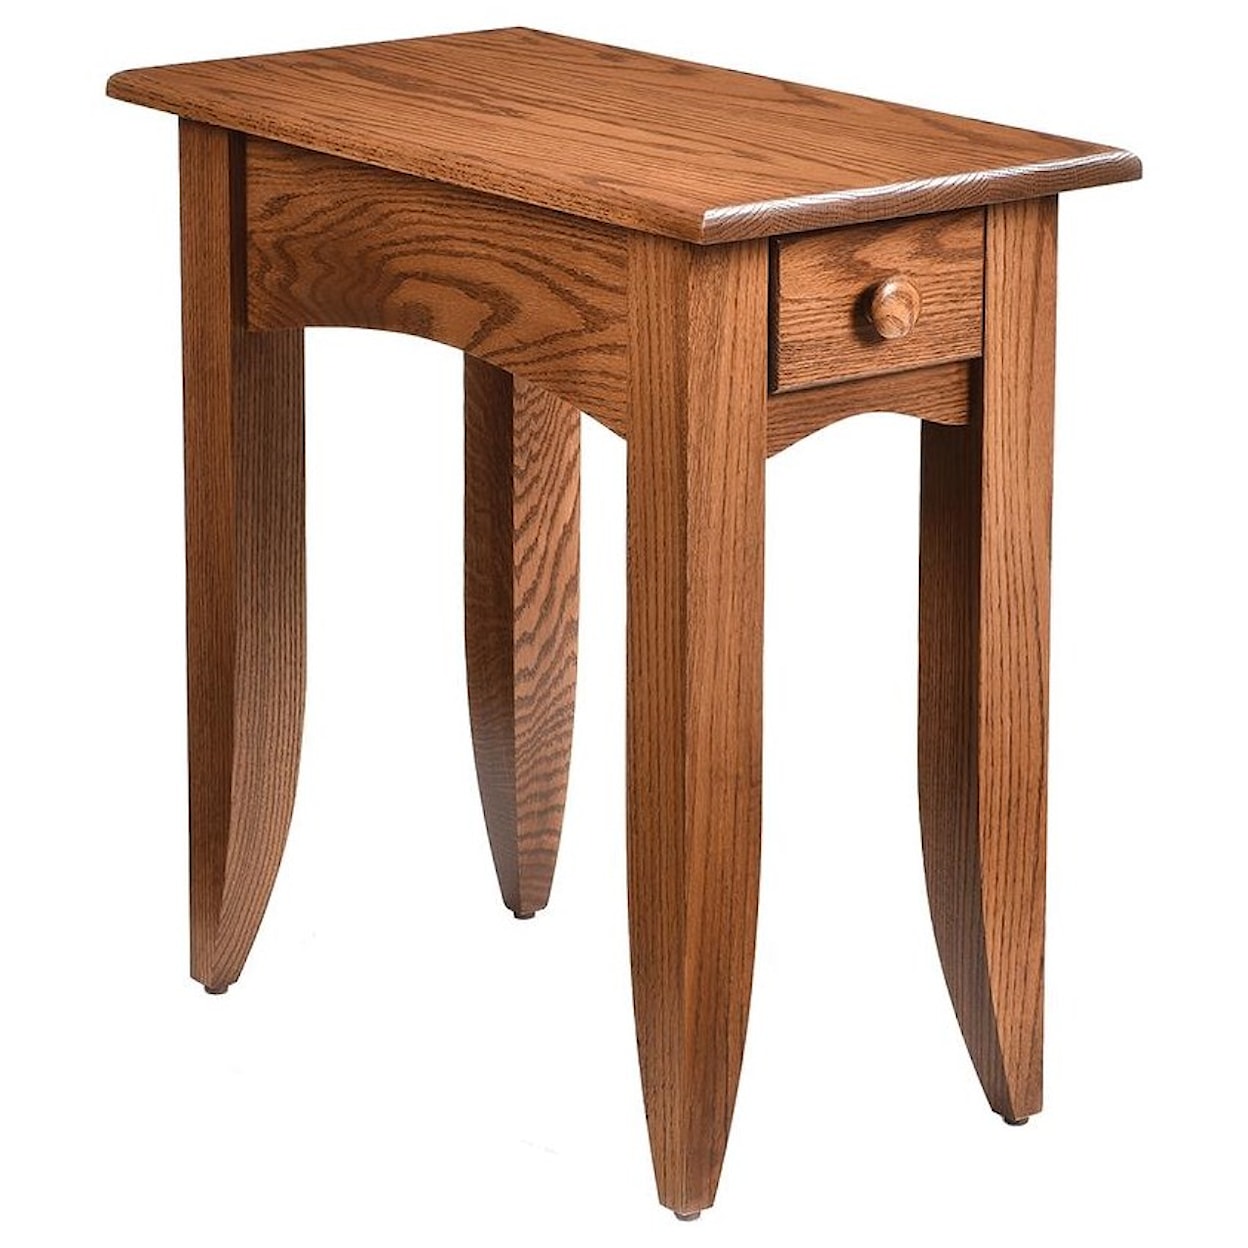 Hopewood Modern Mission Chairside Table